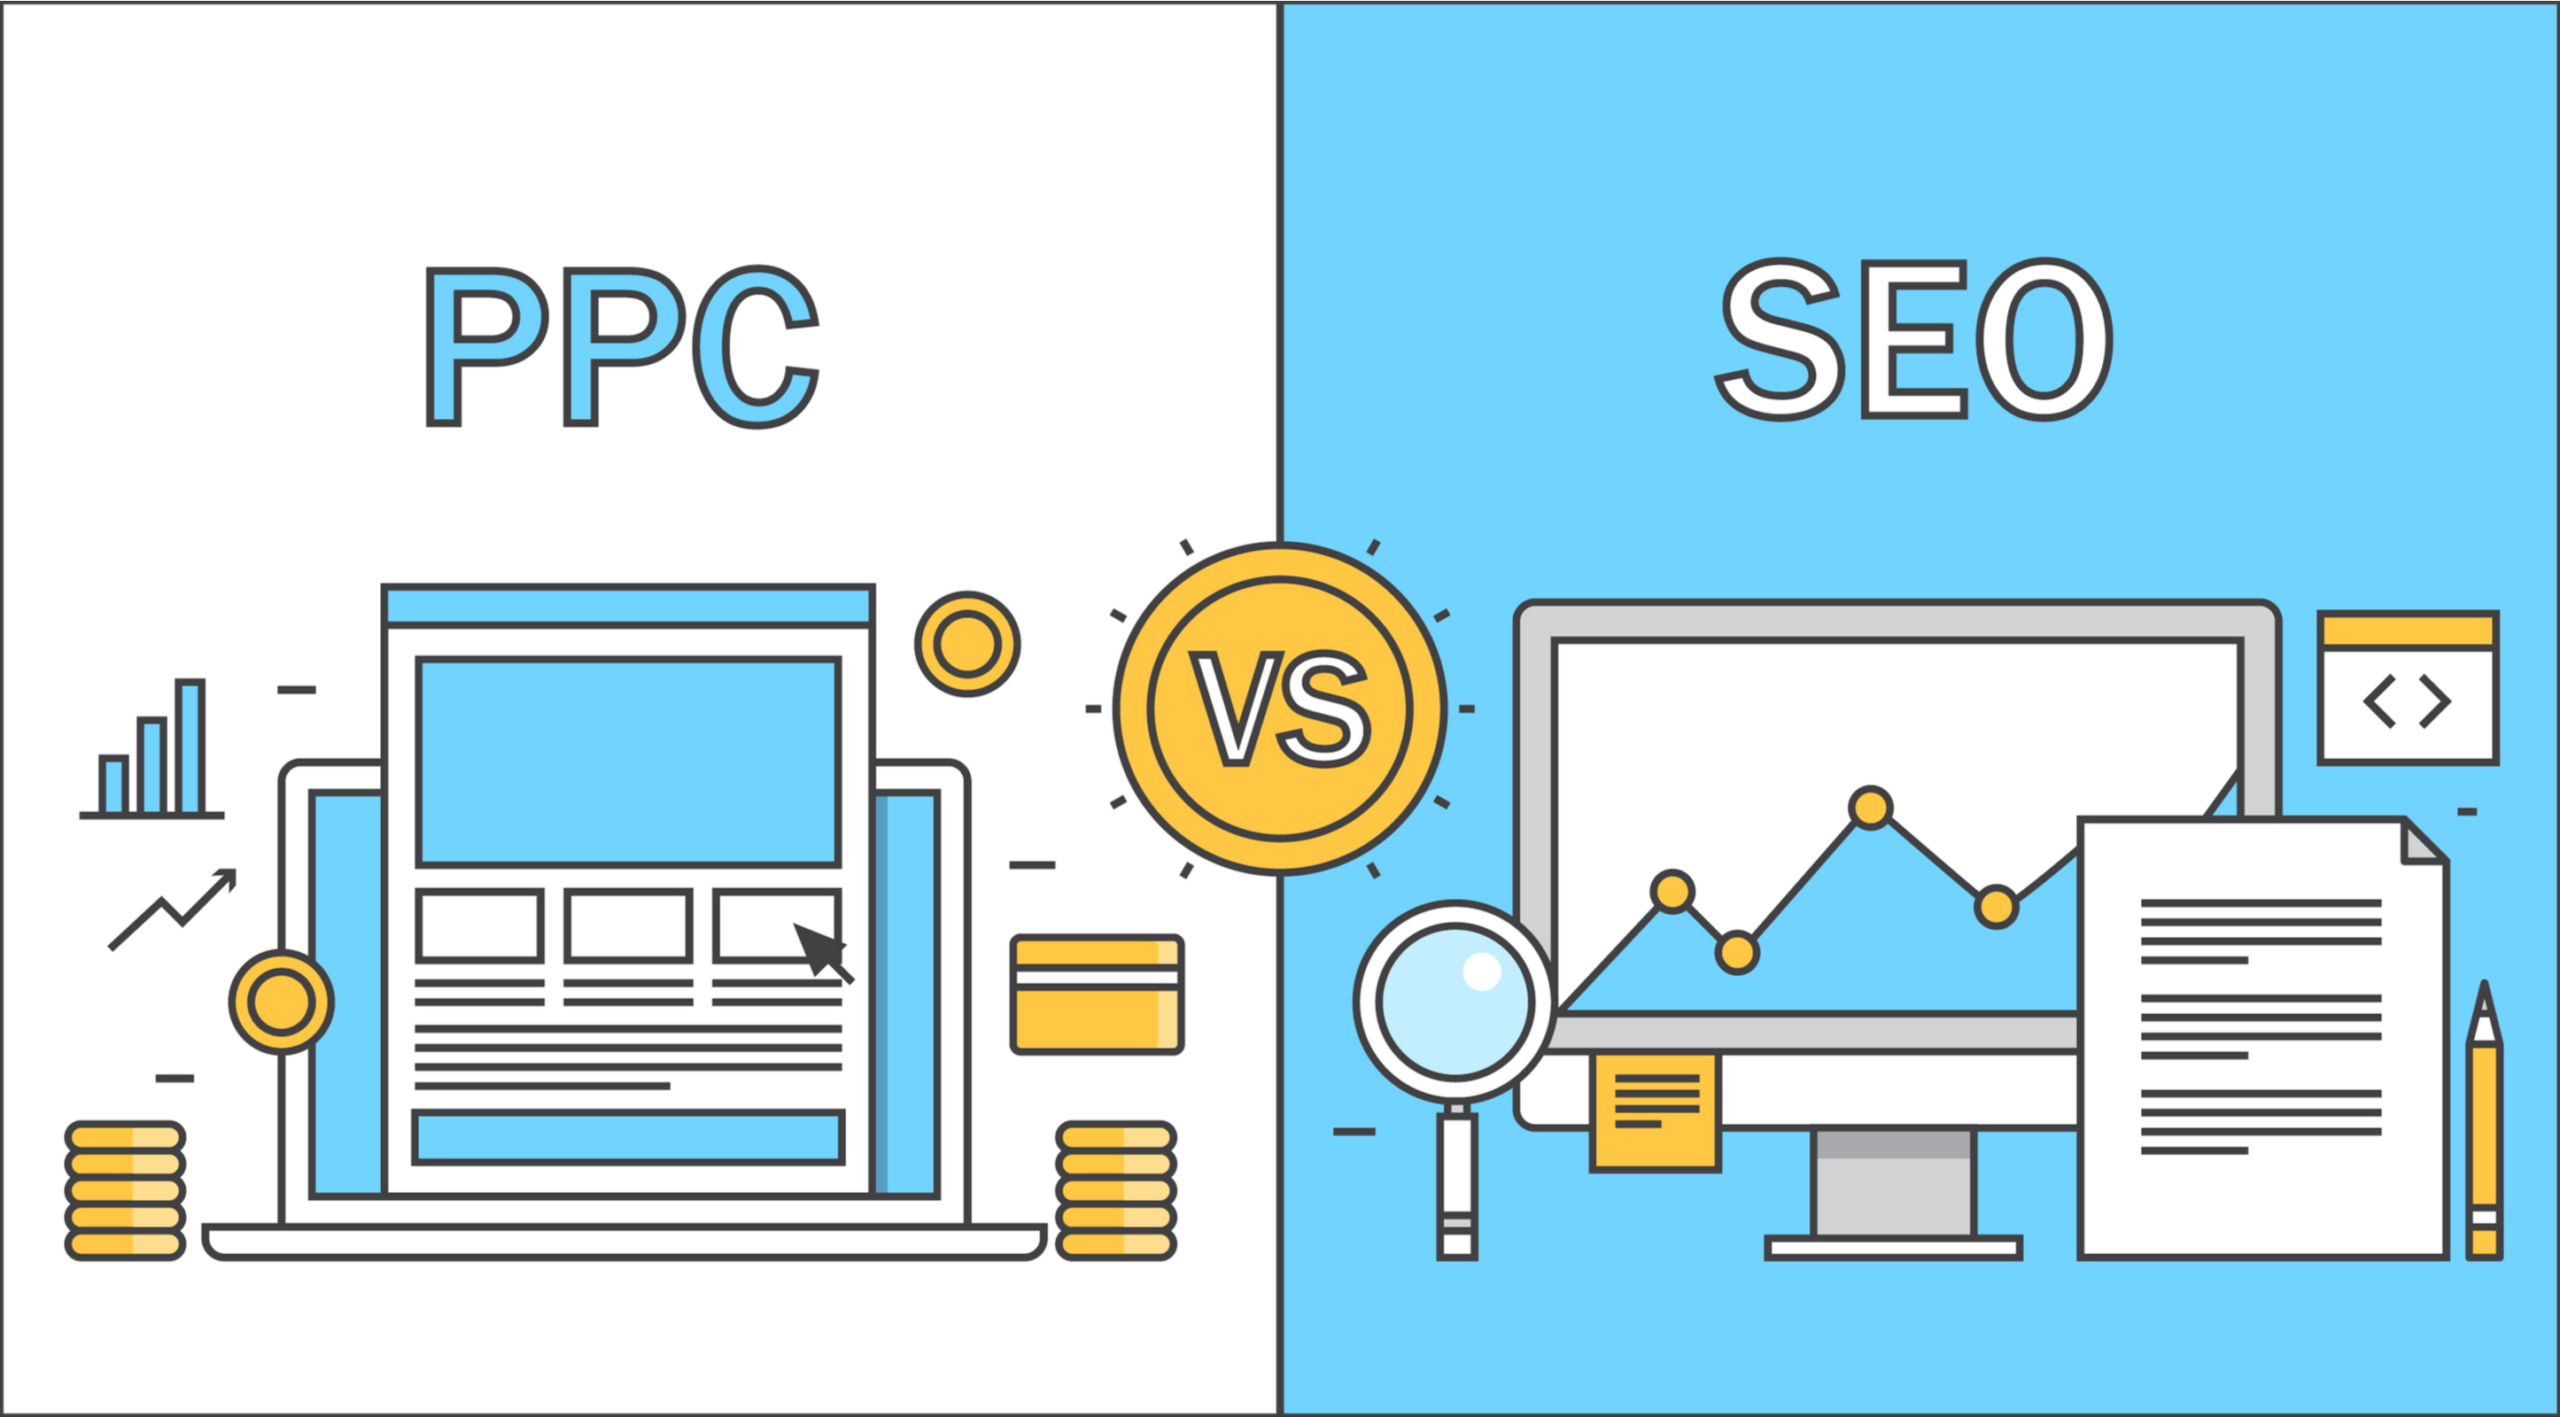 seo-vs-ppc-pros-cons-everything-in-between by Pranay Choudhary from gadgetlearn.com